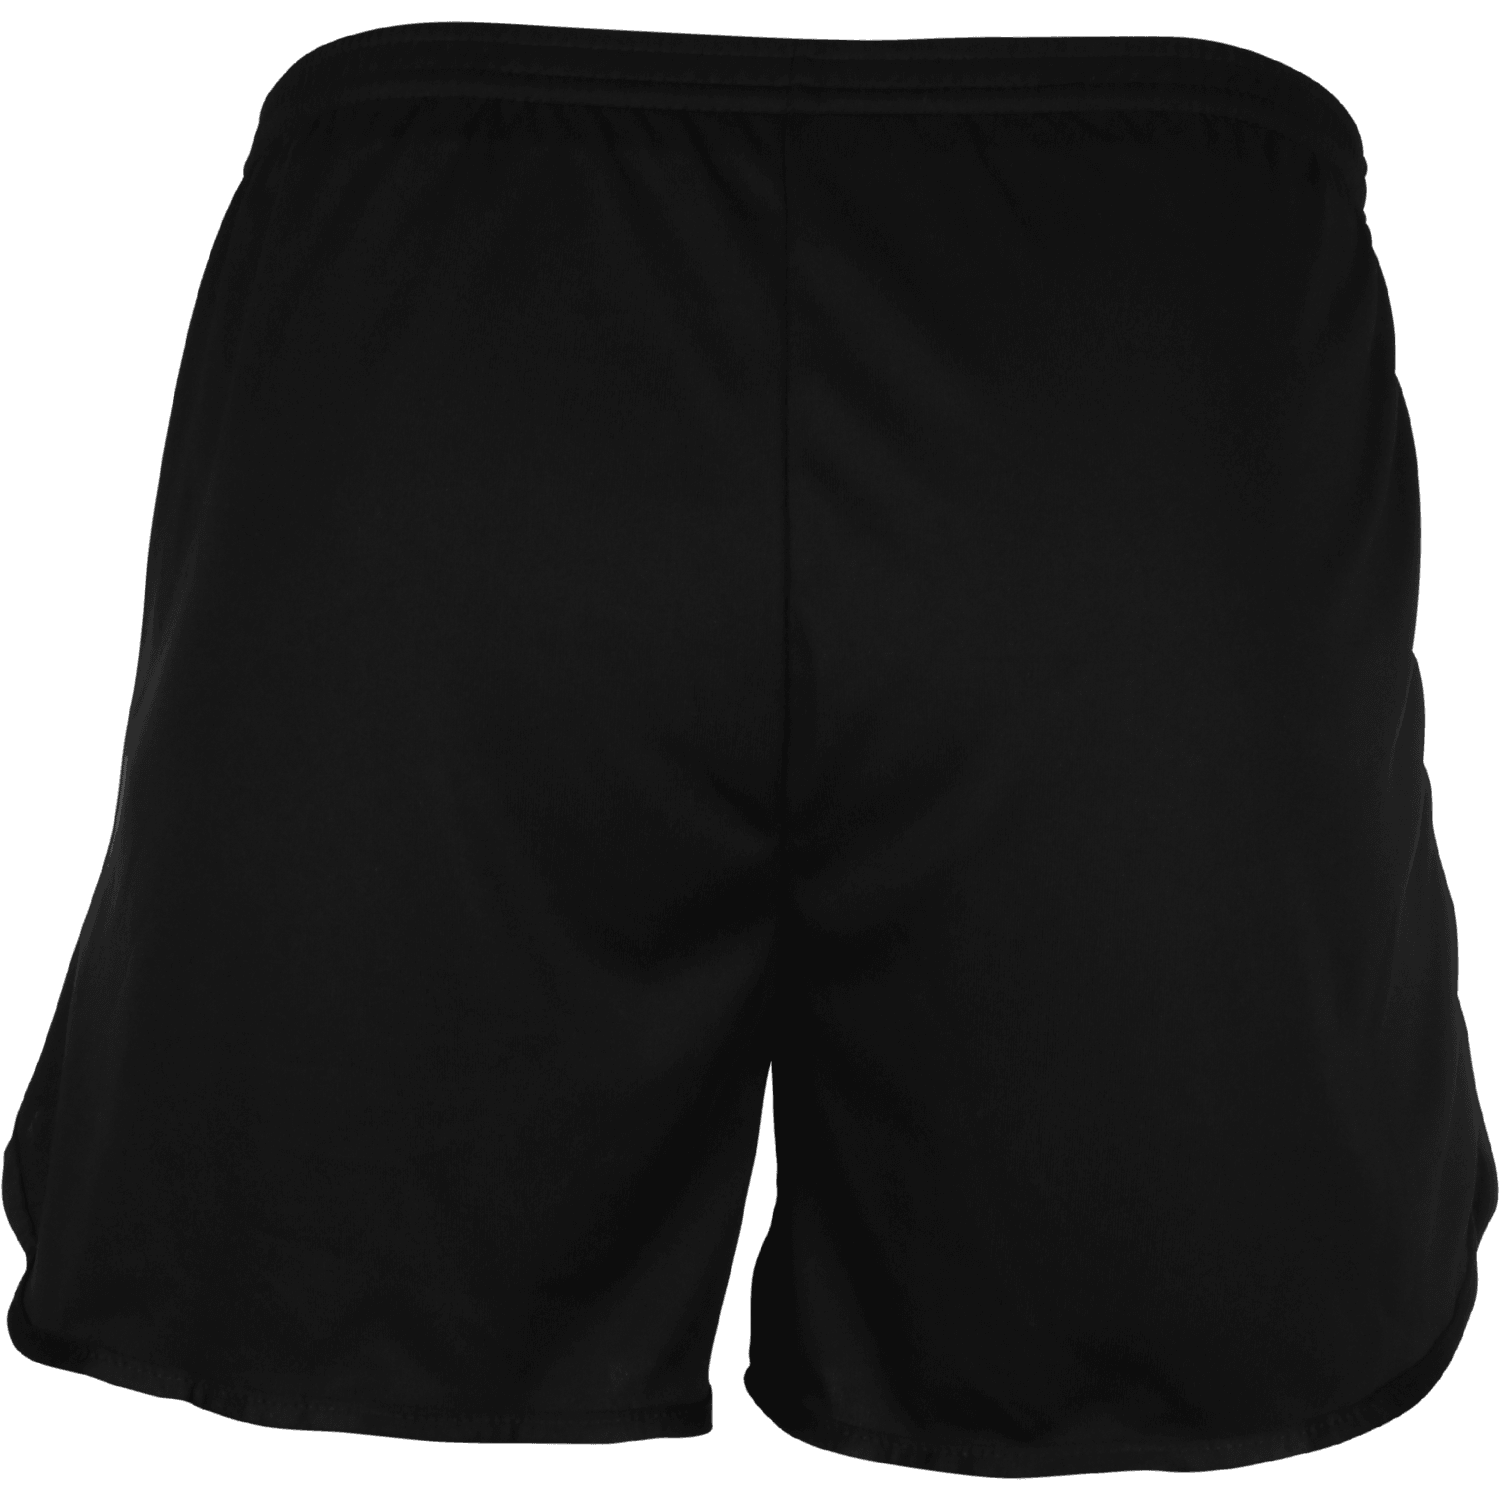 5% Black Running Shorts with White Lettering - 5% Nutrition